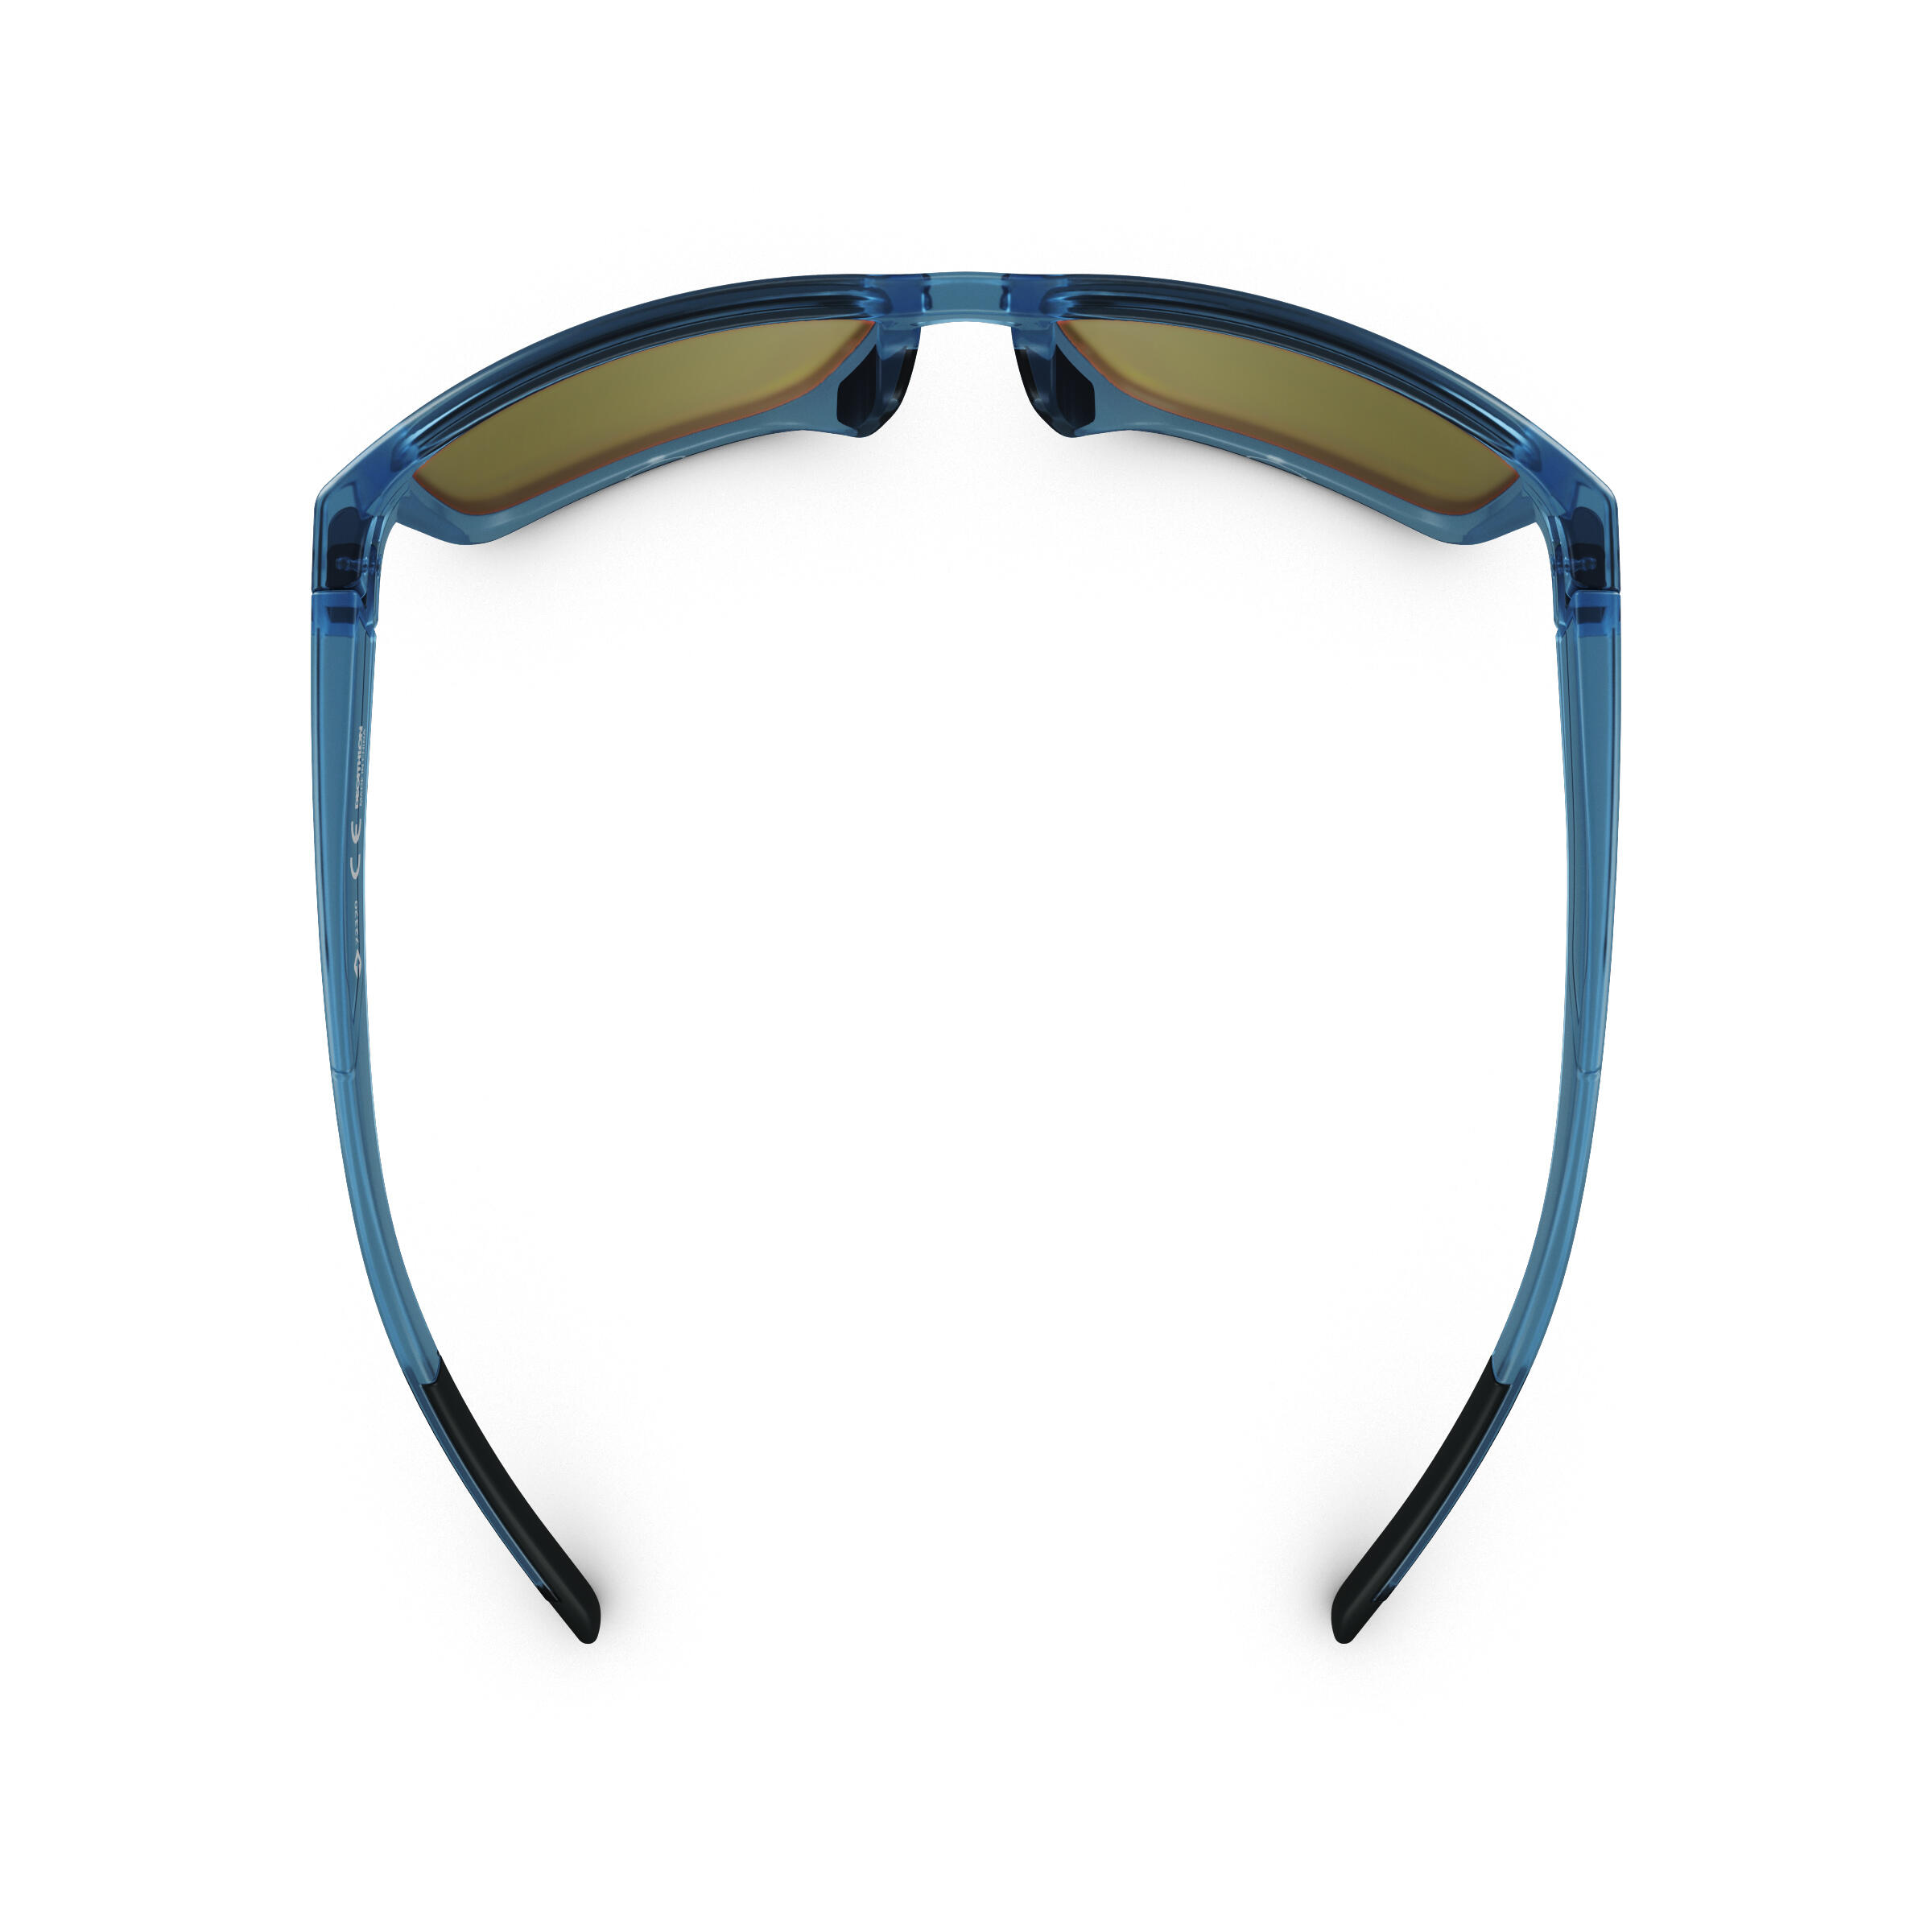 Adult hiking sunglasses – MH530 – Category 3 6/9